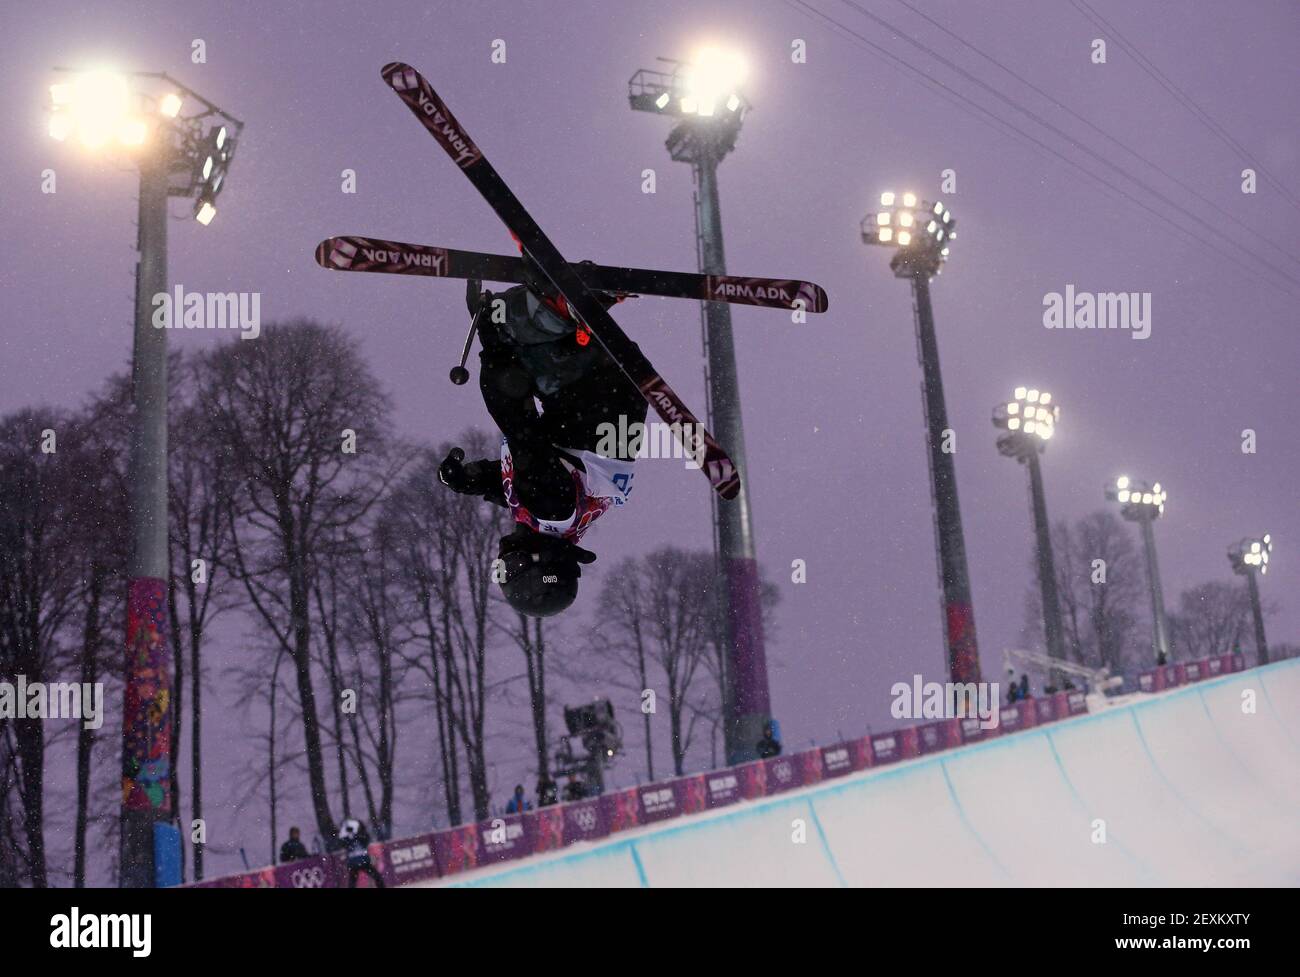 Peter Crook of the British Virgin Islands competes in qualifying for the men's ski halfpipe at Rosa Khutor Extreme Park during the Winter Olympics in Sochi, Russia, Tuesday, Feb. 18, 2014. (Photo by Brian Cassella/Chicago Tribune/MCT/Sipa USA) Stock Photo